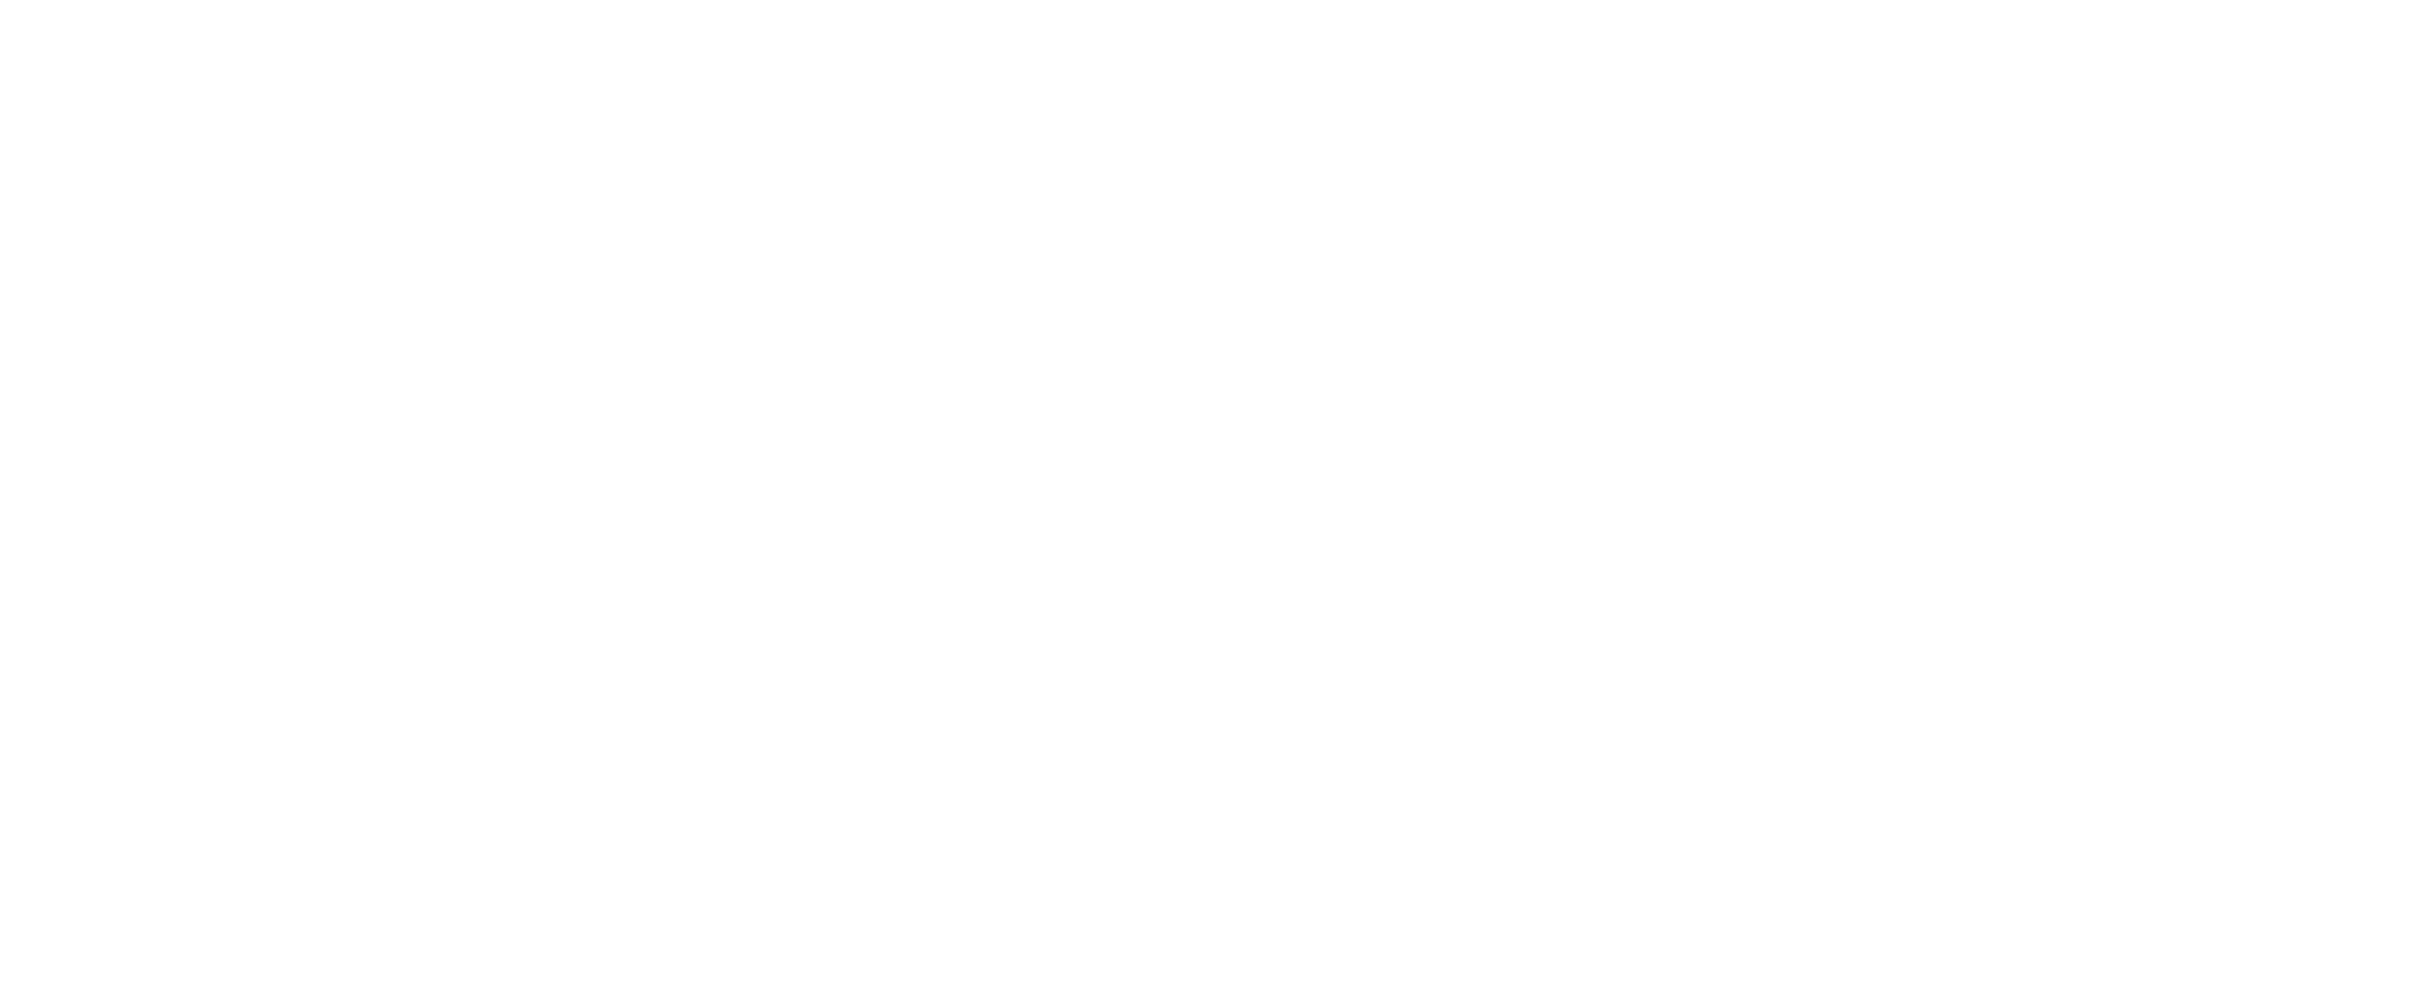 Knoxville News